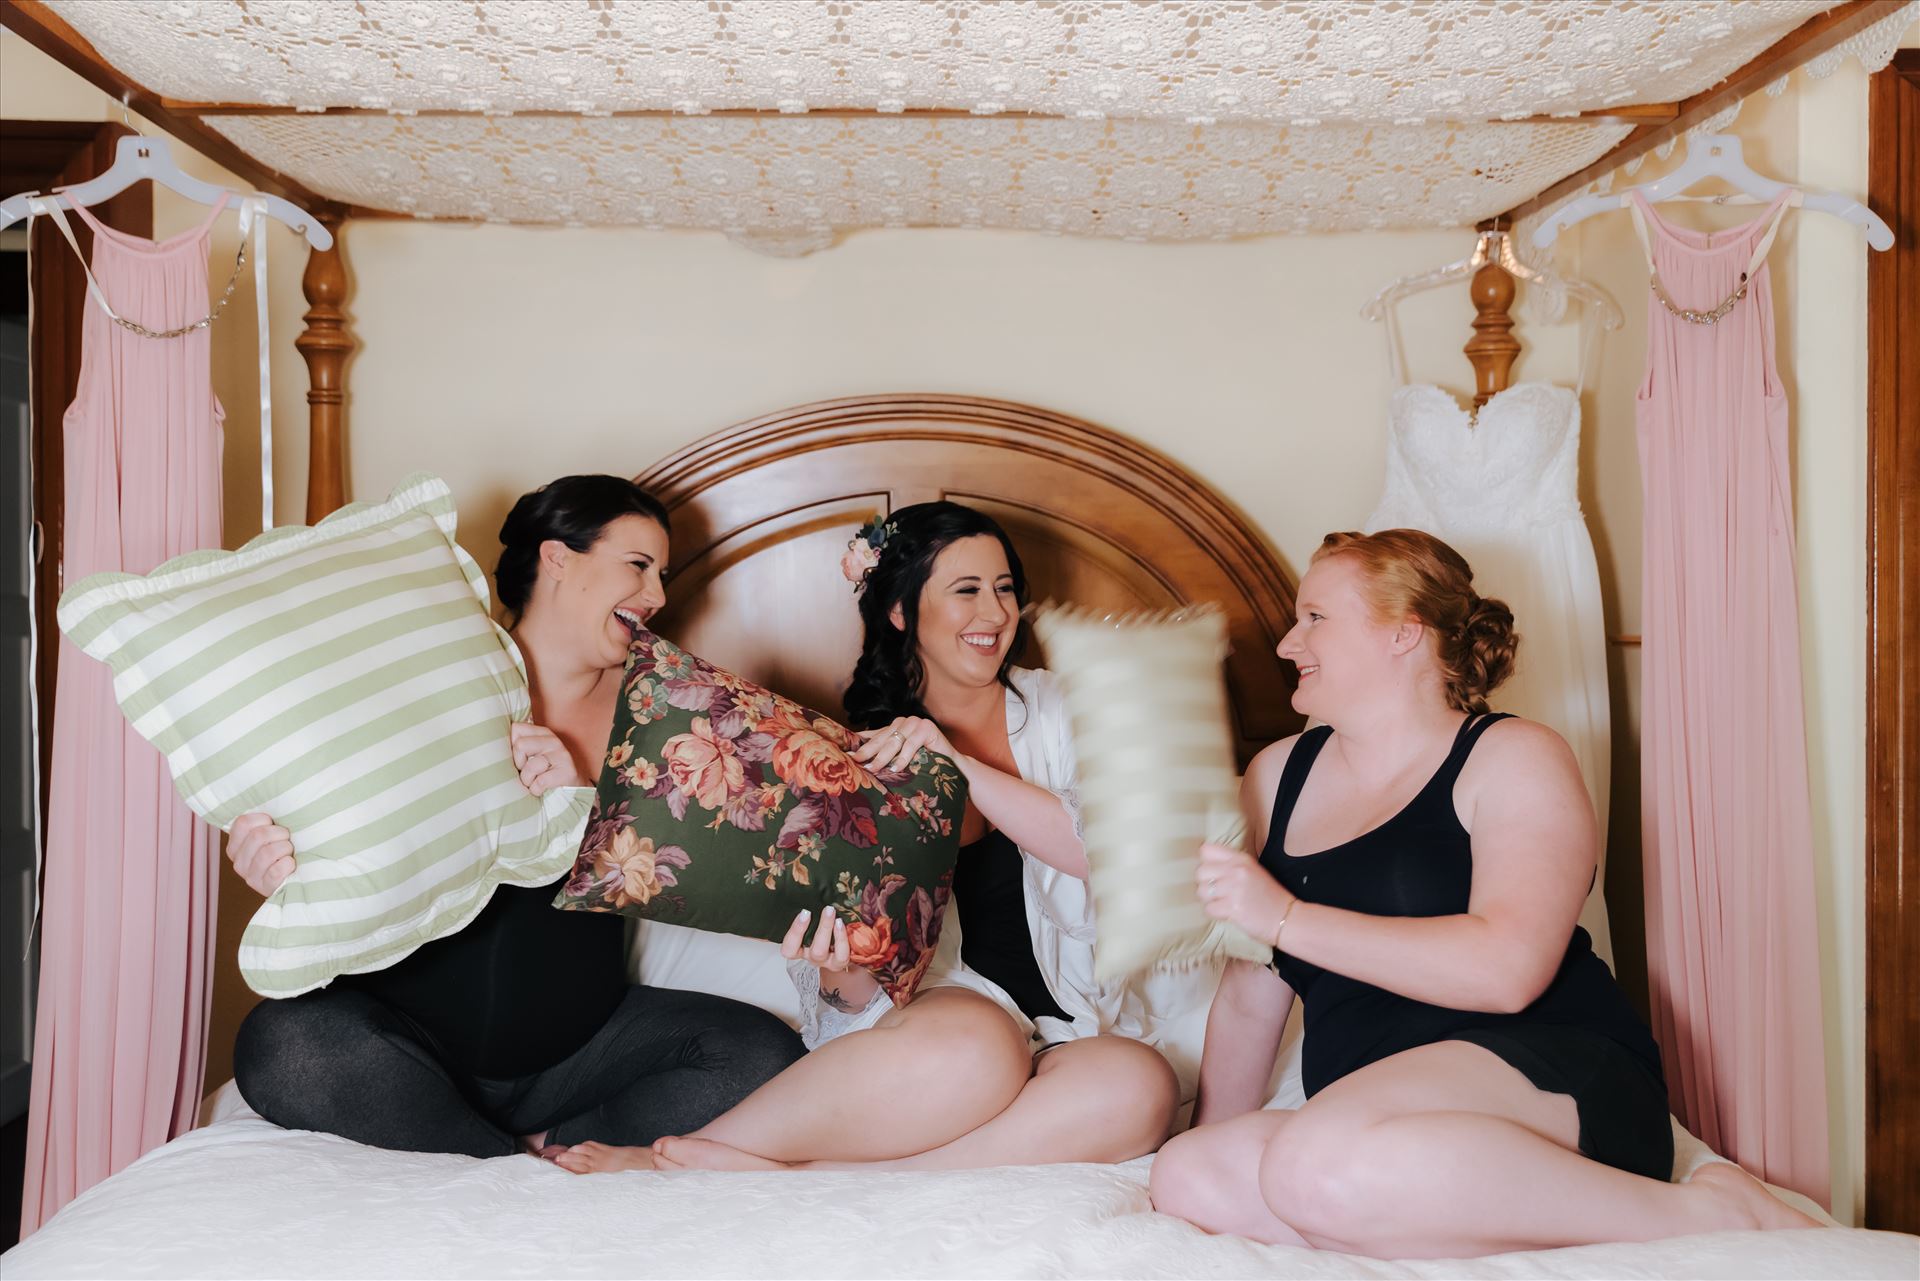 Kendra and Mitchell 013 - Emily House Bed and Breakfast Paso Robles California Wedding Photography by Mirrors Edge Photography.  The girls having fun by Sarah Williams